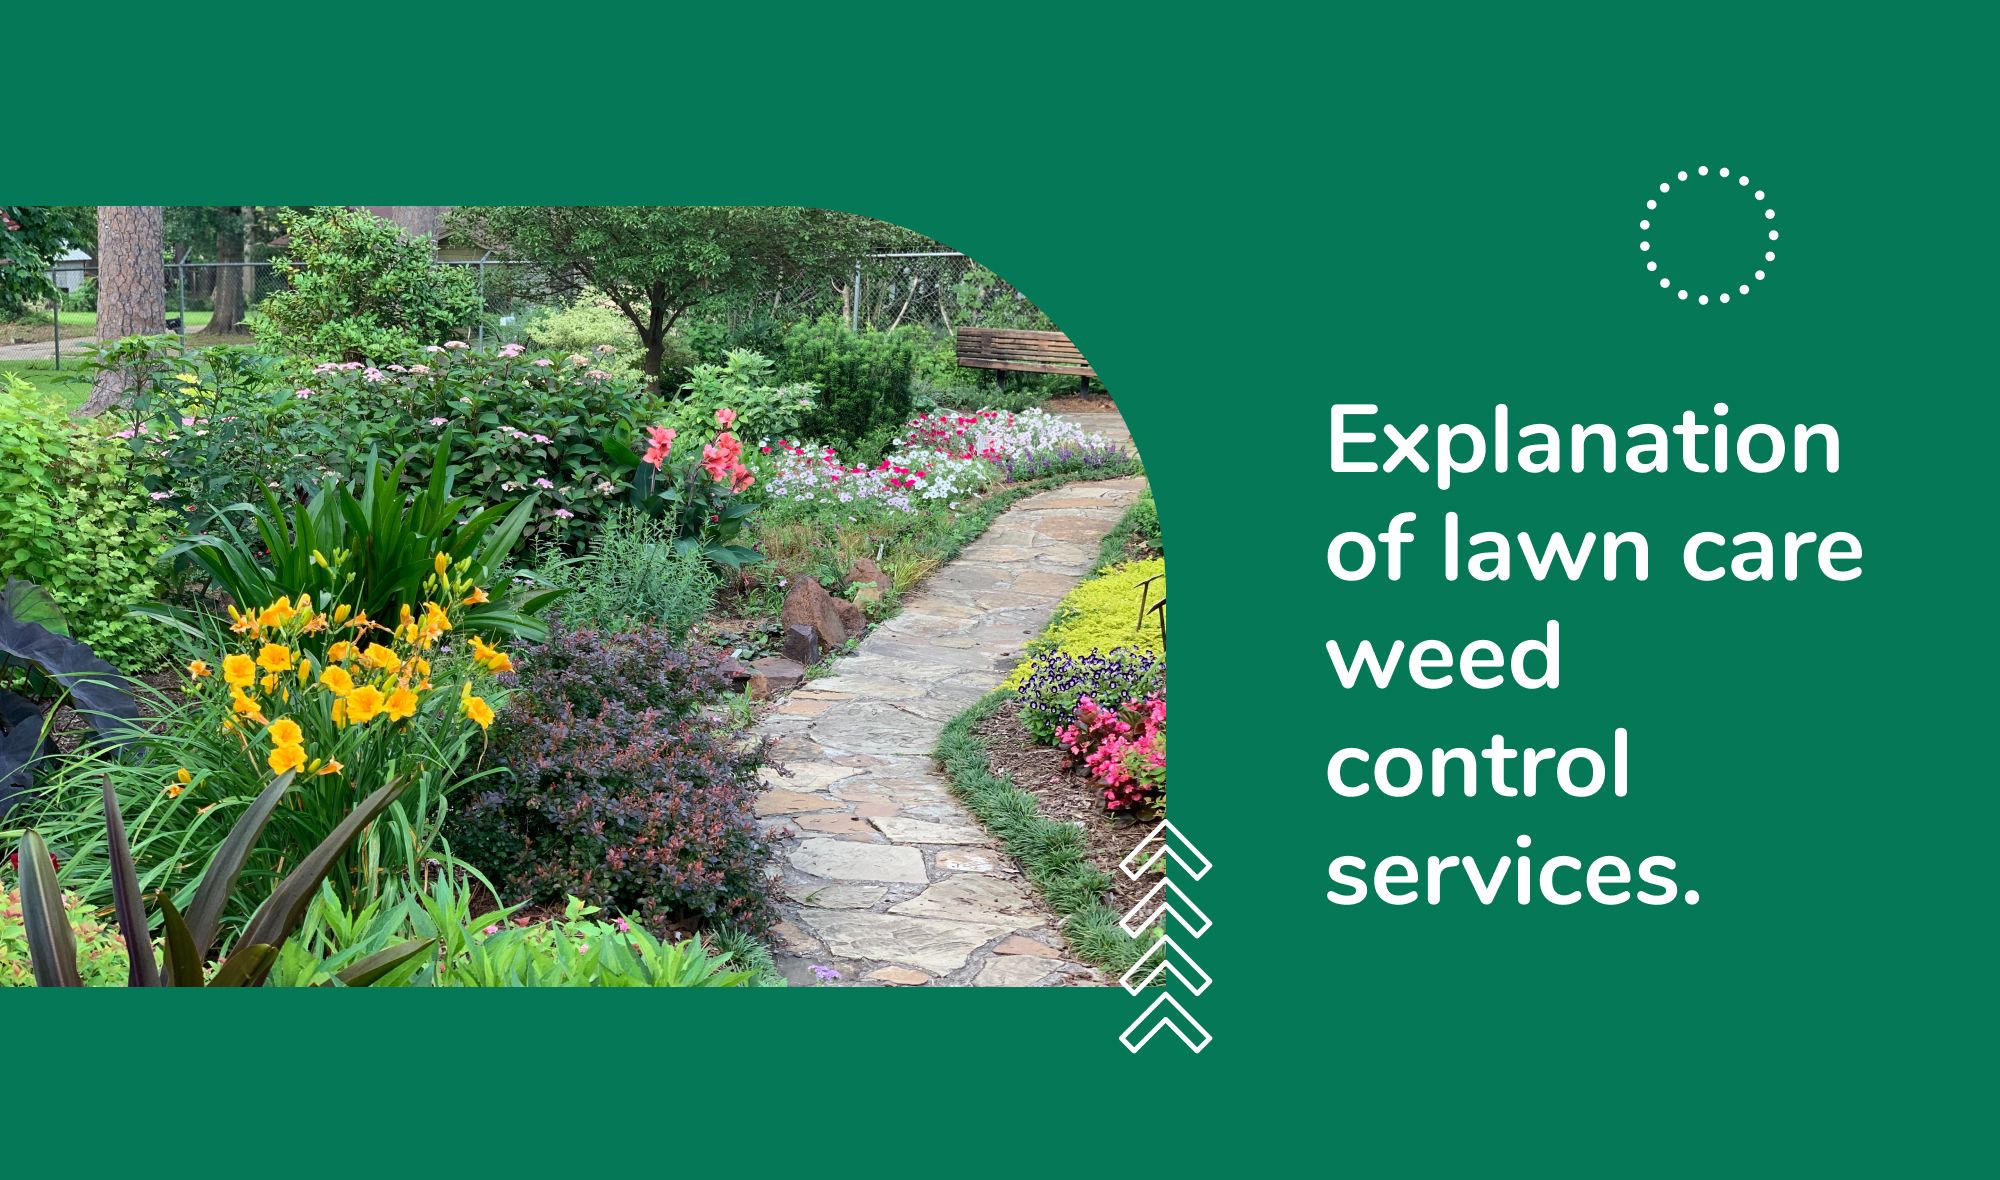 Explanation of lawn care weed control services.